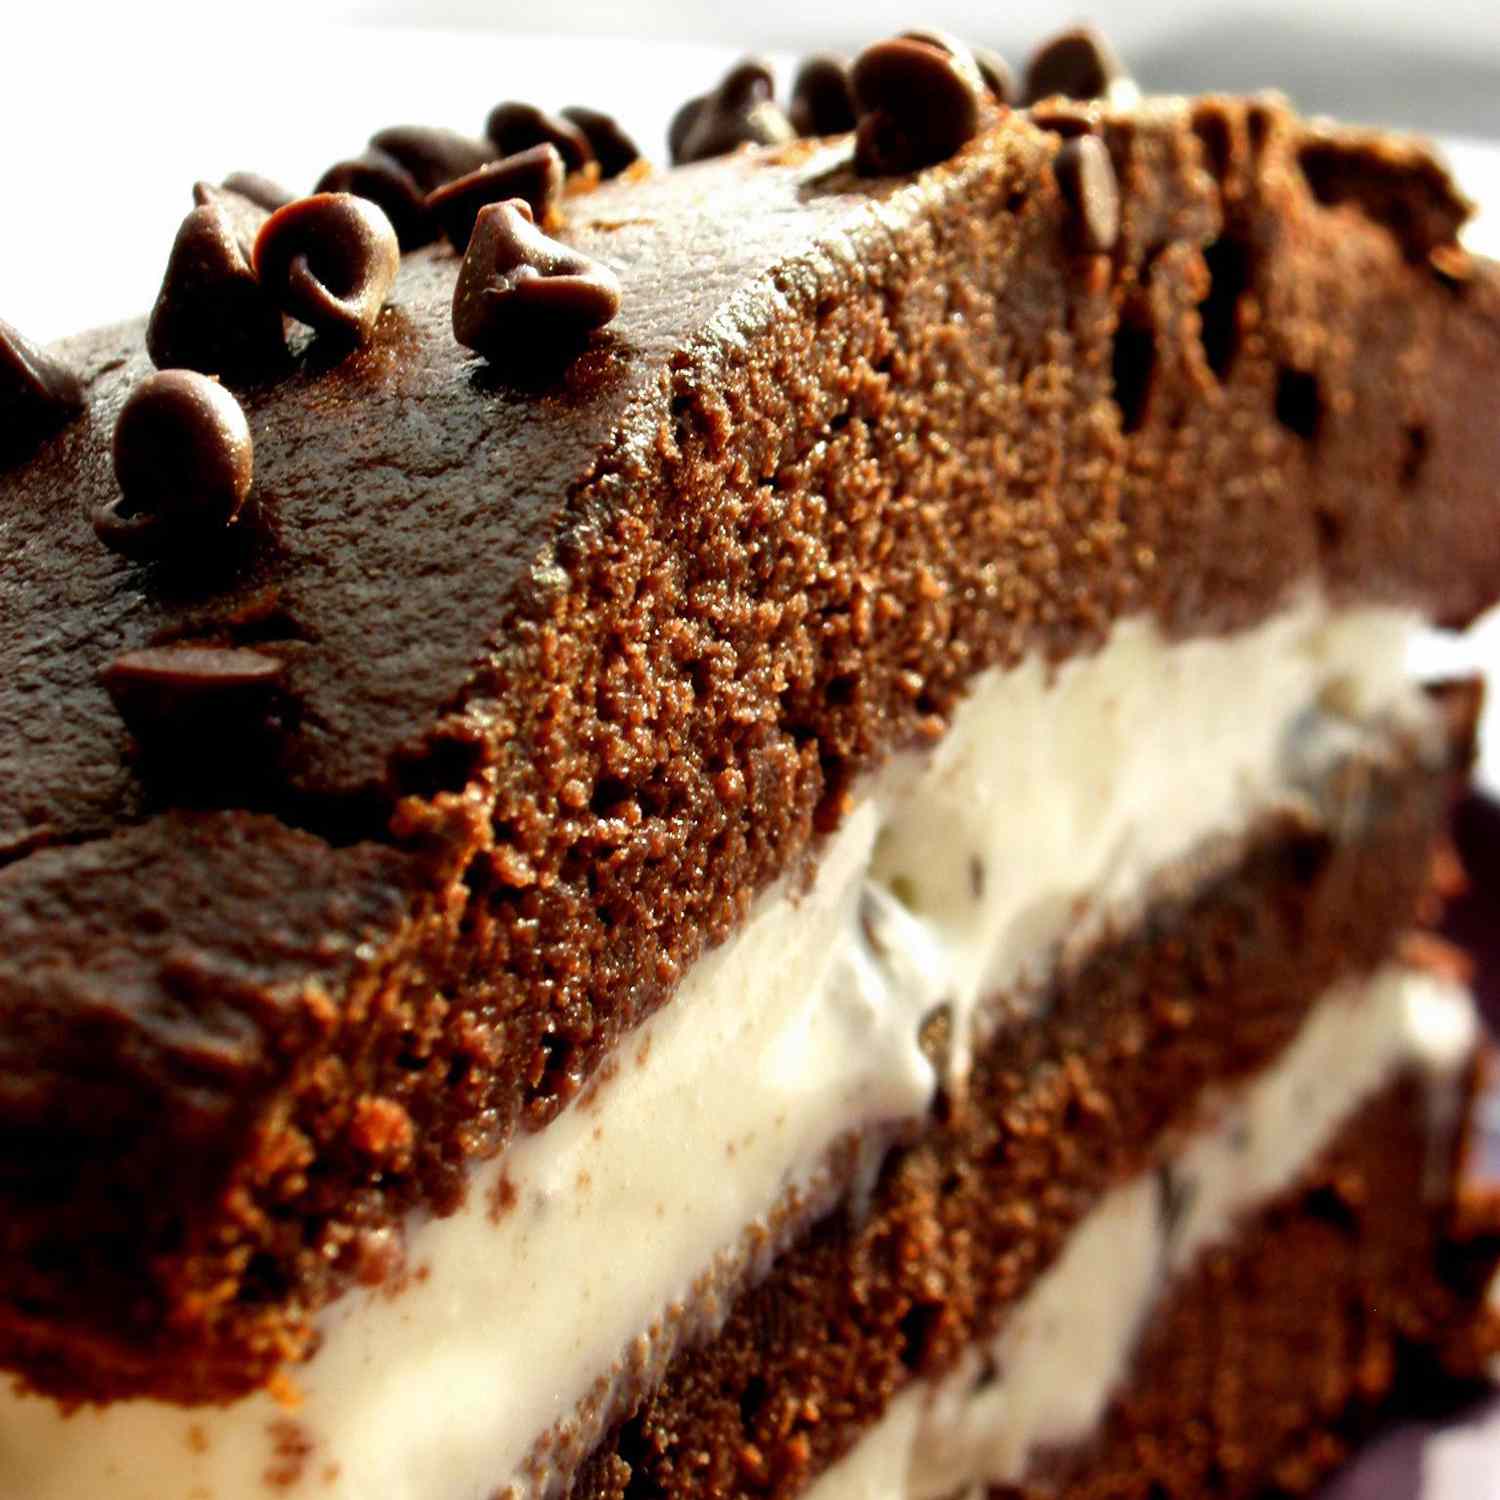 close up view of a slice of chocolate and vanilla ice cream cake